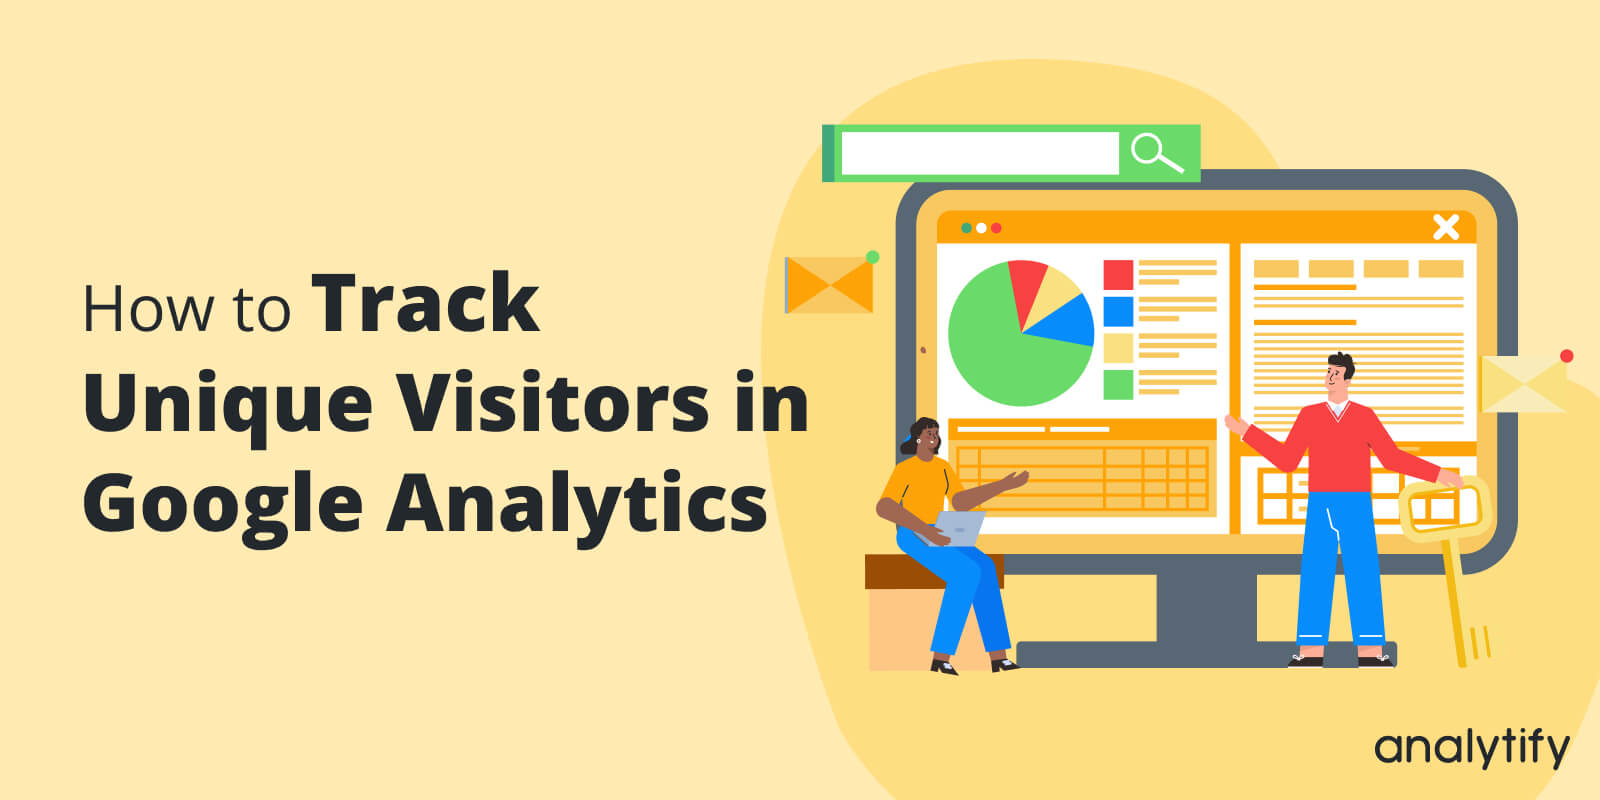 How to Track Unique Visitors in Google Analytics